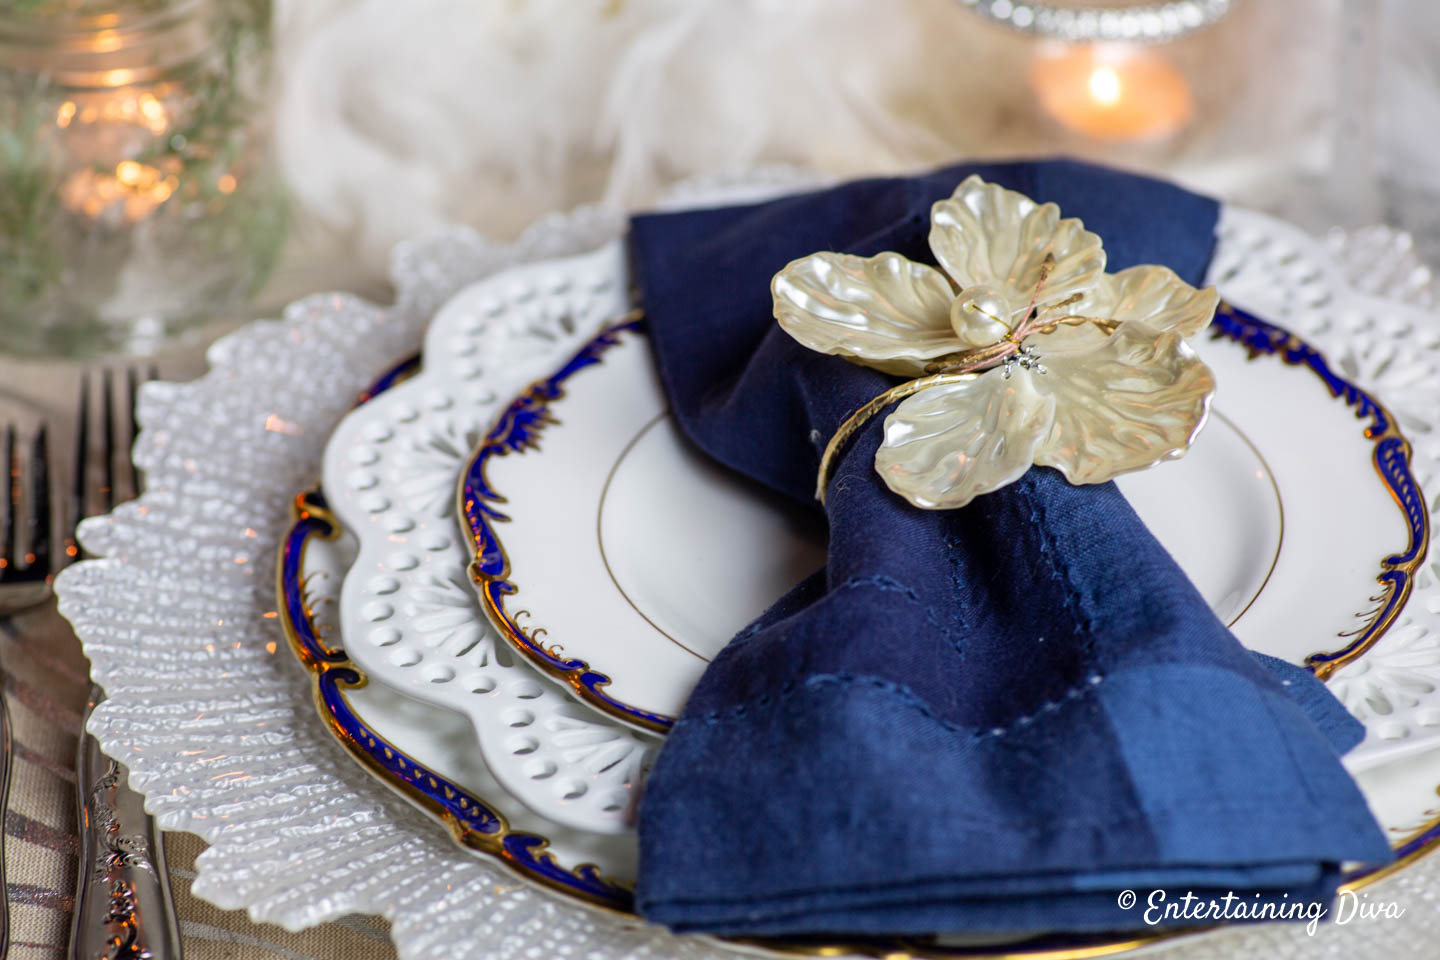 White, blue and gold place setting as winter wonderland table decor